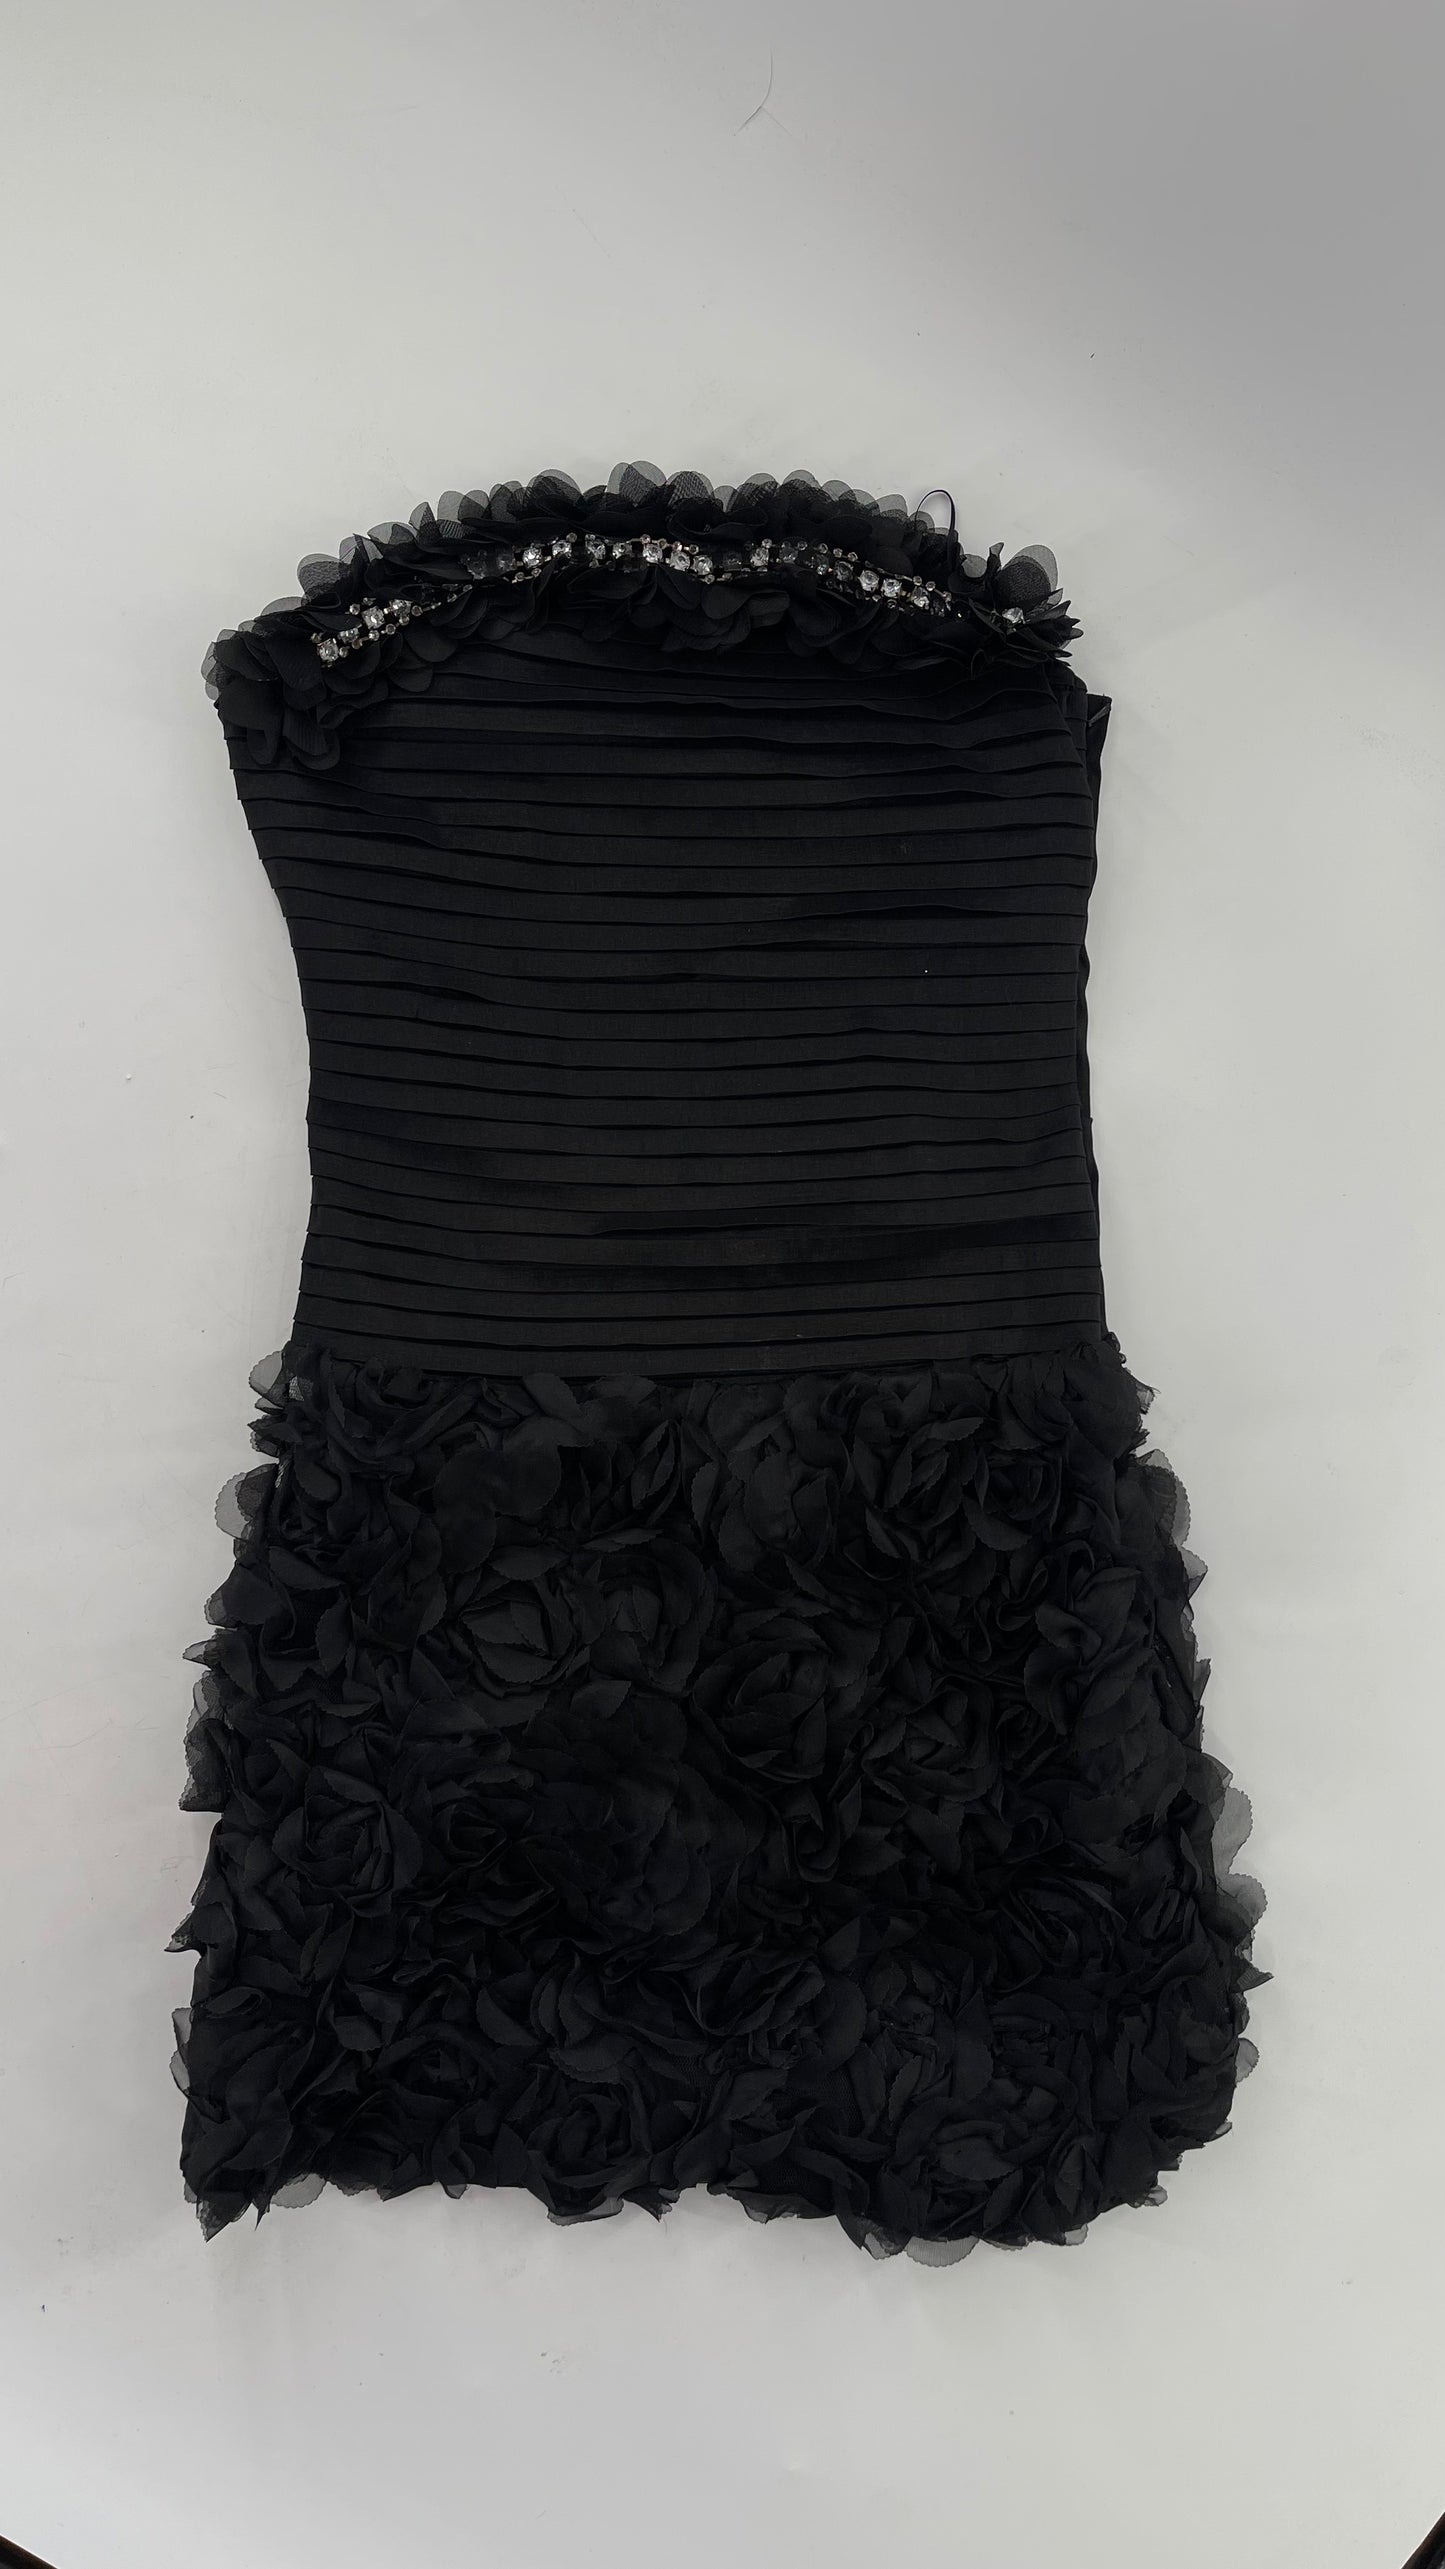 C.O:GWBG Black Dress with Pleated Bodice, Floral Ruffled Skirt and Bedazzled Bustline (S/M)